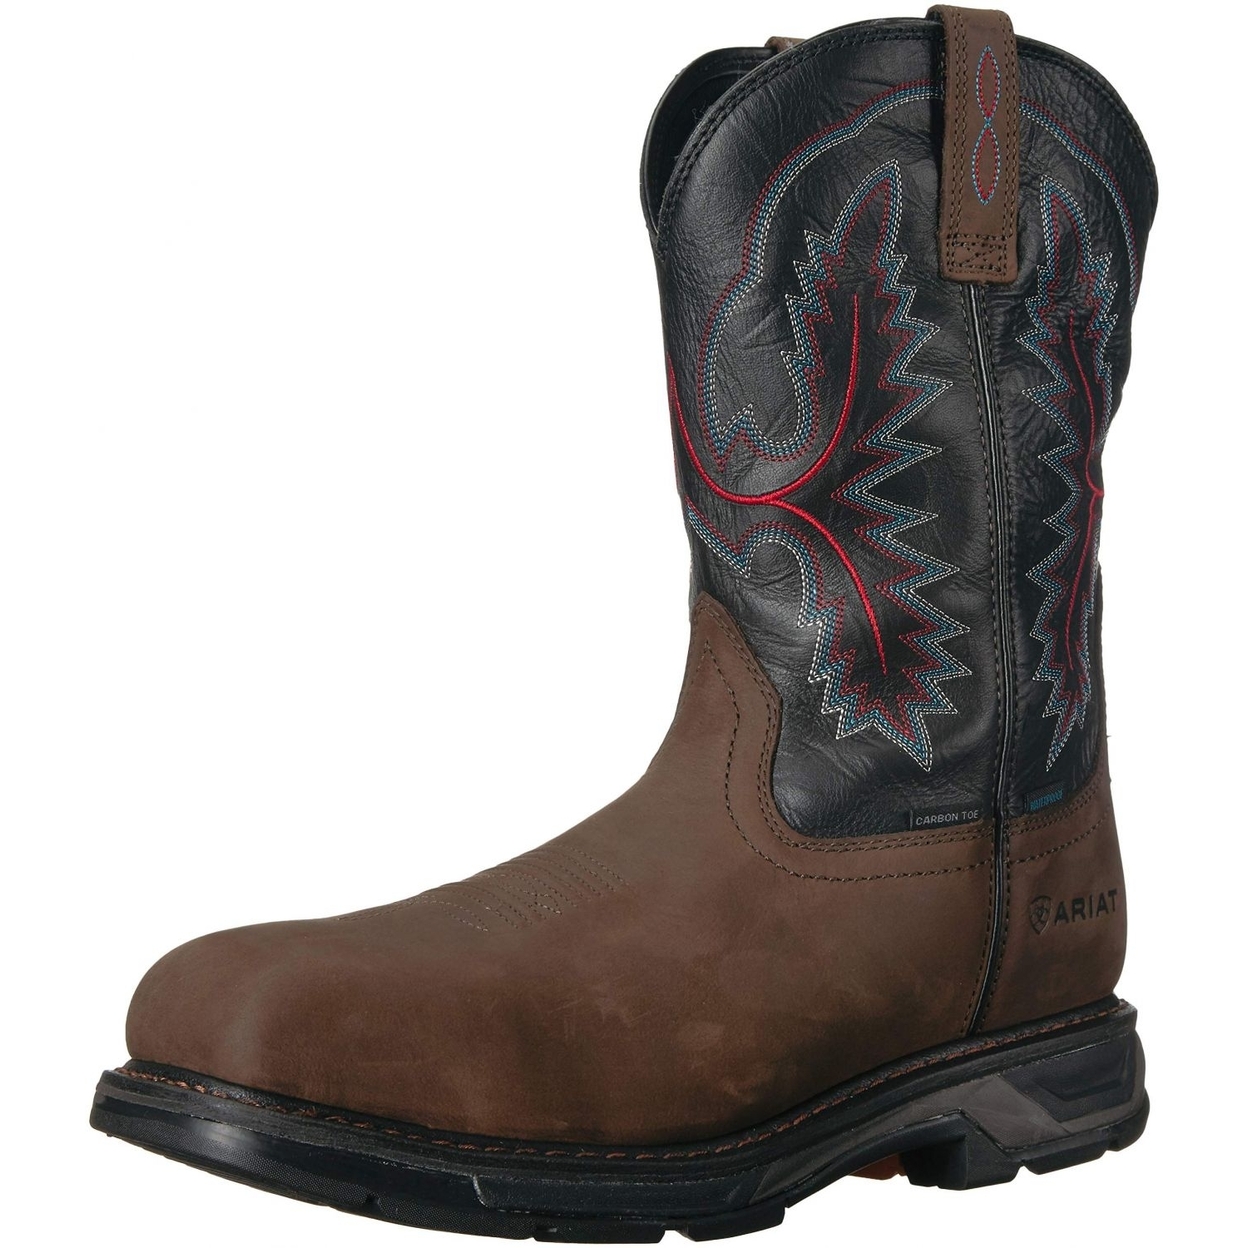 Ariat Work Men's Workhog XT H2O Carbon Toe Western Boot ONE SIZE BRK/ FOREST - BRK/ FOREST, 11.5-D